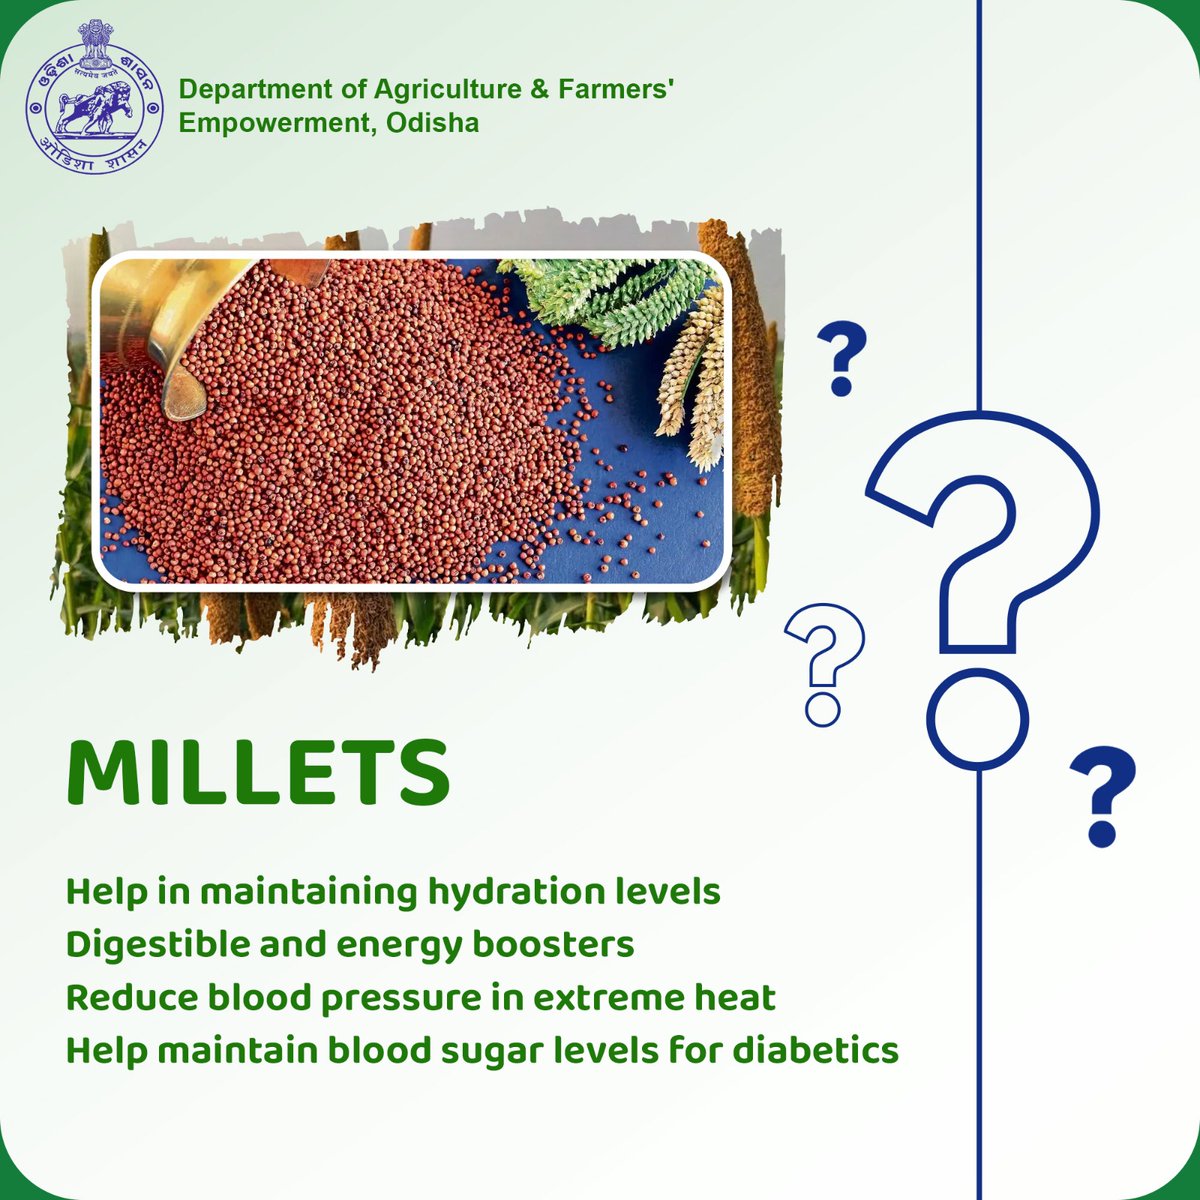 Millets aren't just superfoods; they're all-rounders. Finger millet, just like it's super family members, aid in weight loss and beating the summer heat. Keep an eye out for this super ingredient in your upcoming meals.